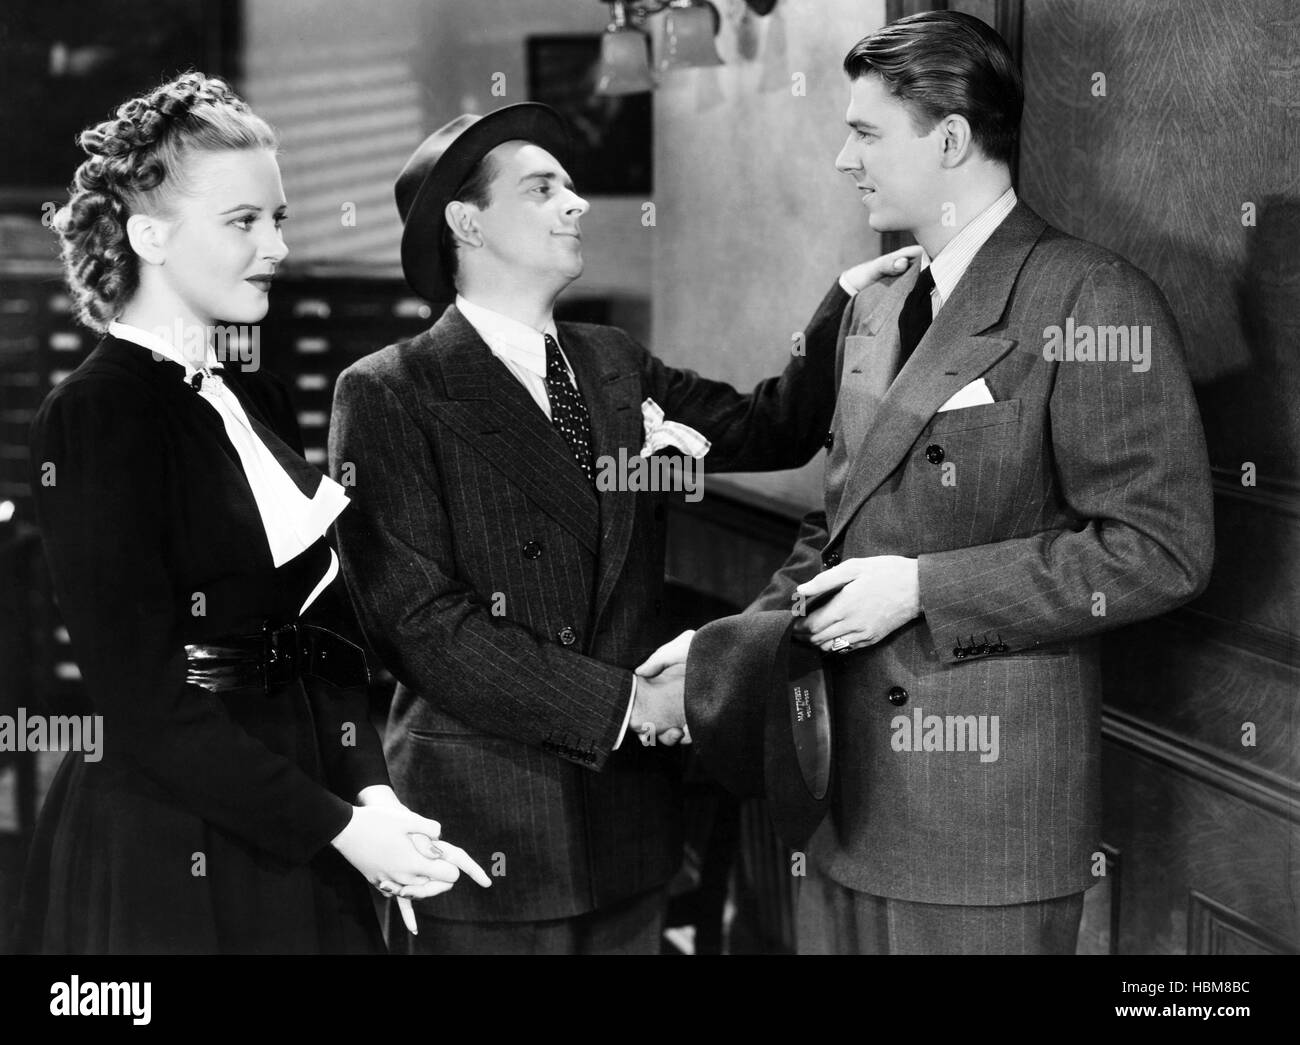 CODE OF THE SECRET SERVICE, from left, Rosella Towne, Eddie, Foy Jr ...